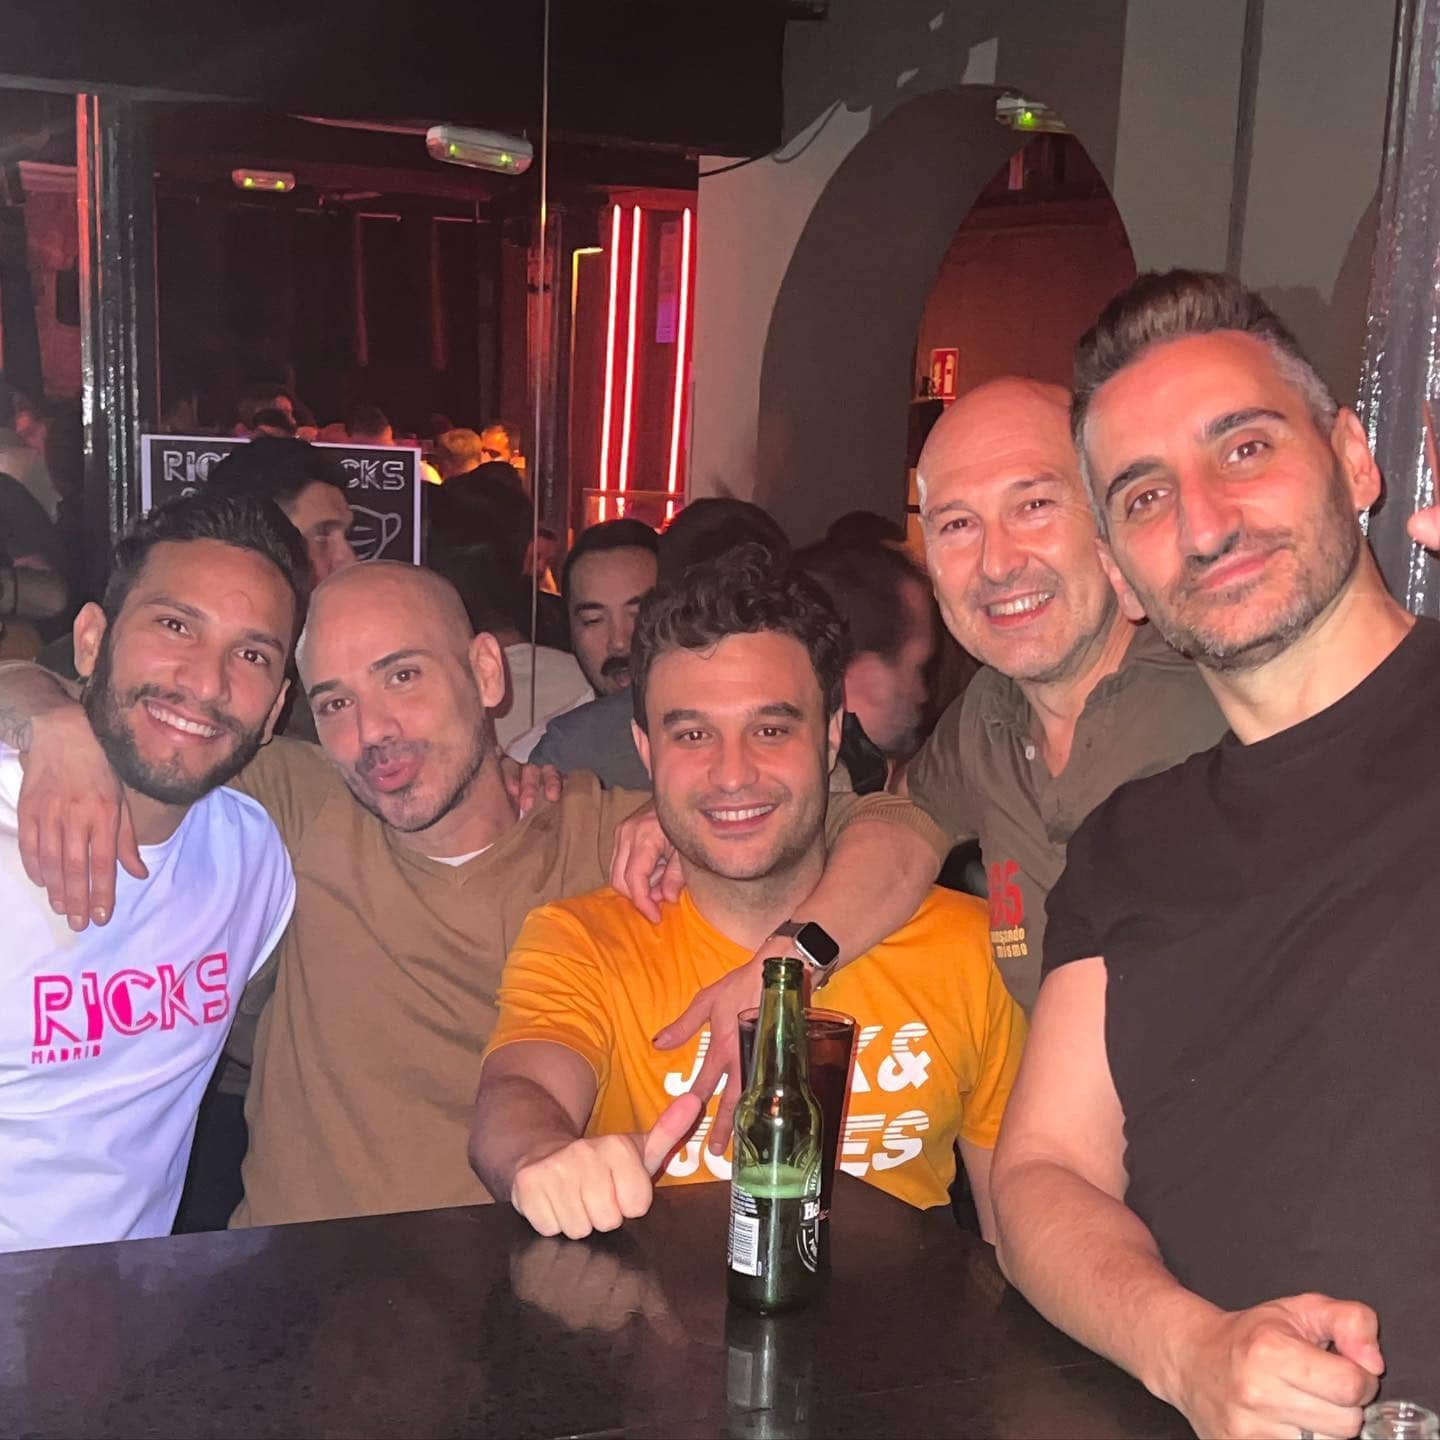 Gay Madrid Guide, Chueca - Events, Bars, Parties, Hotels